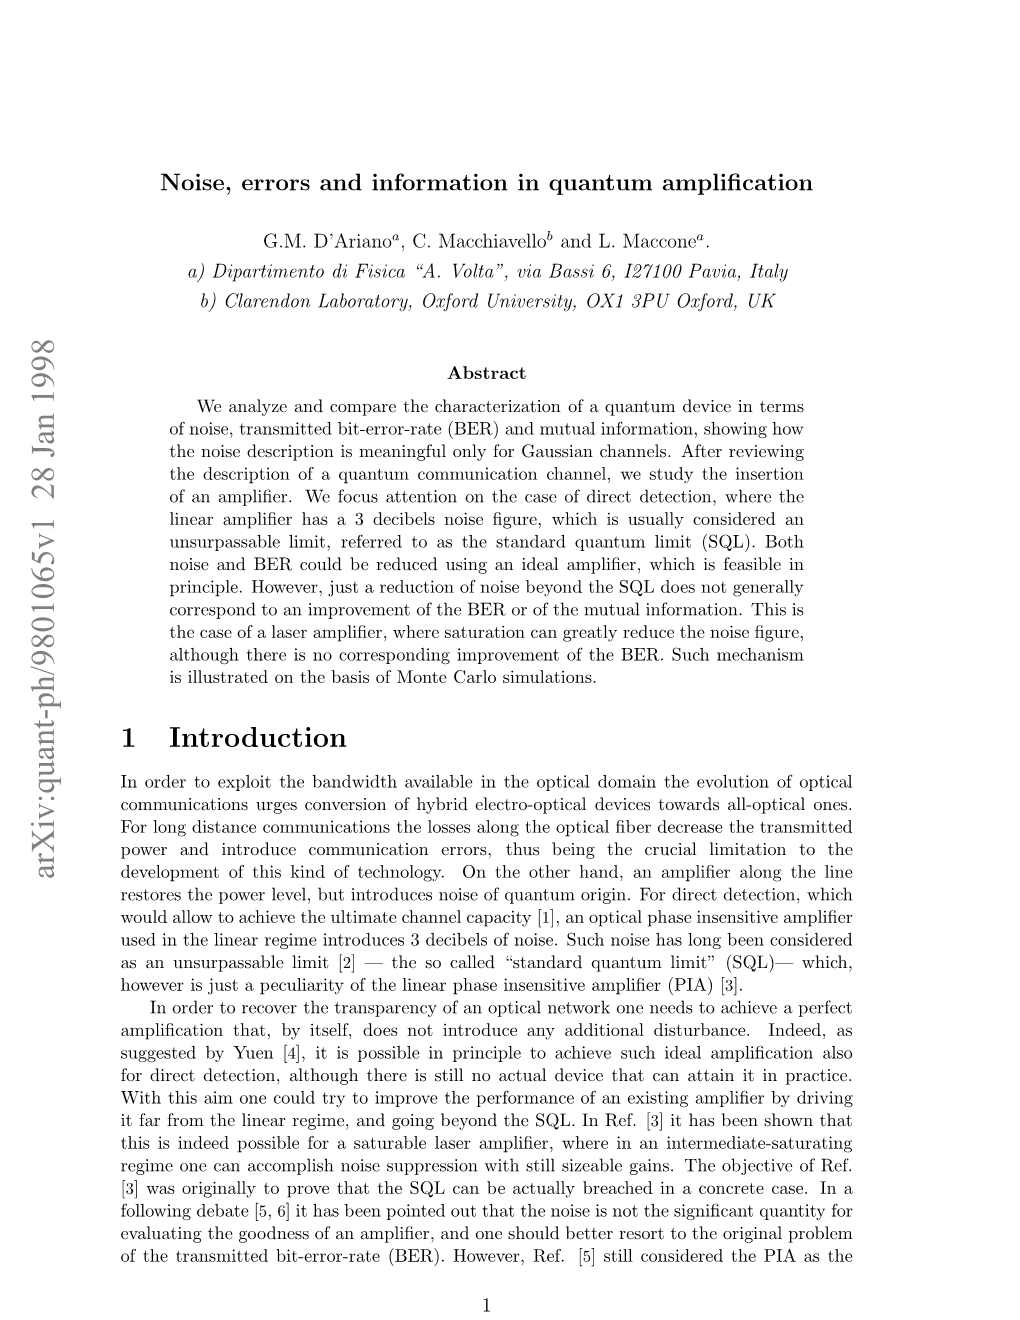 Noise, Errors and Information in Quantum Amplification